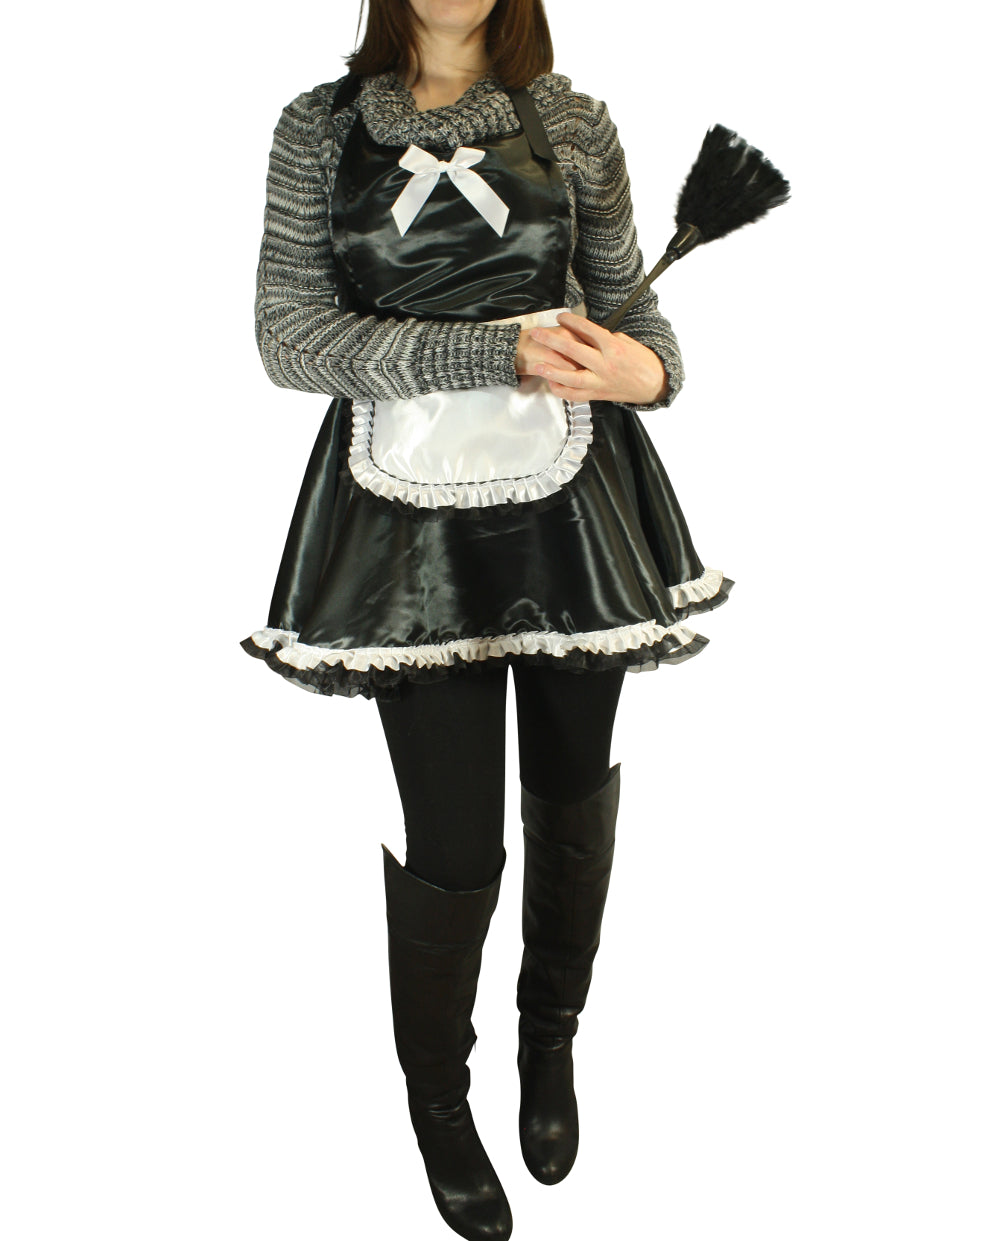 French Maid Apron by Tipsy Totes